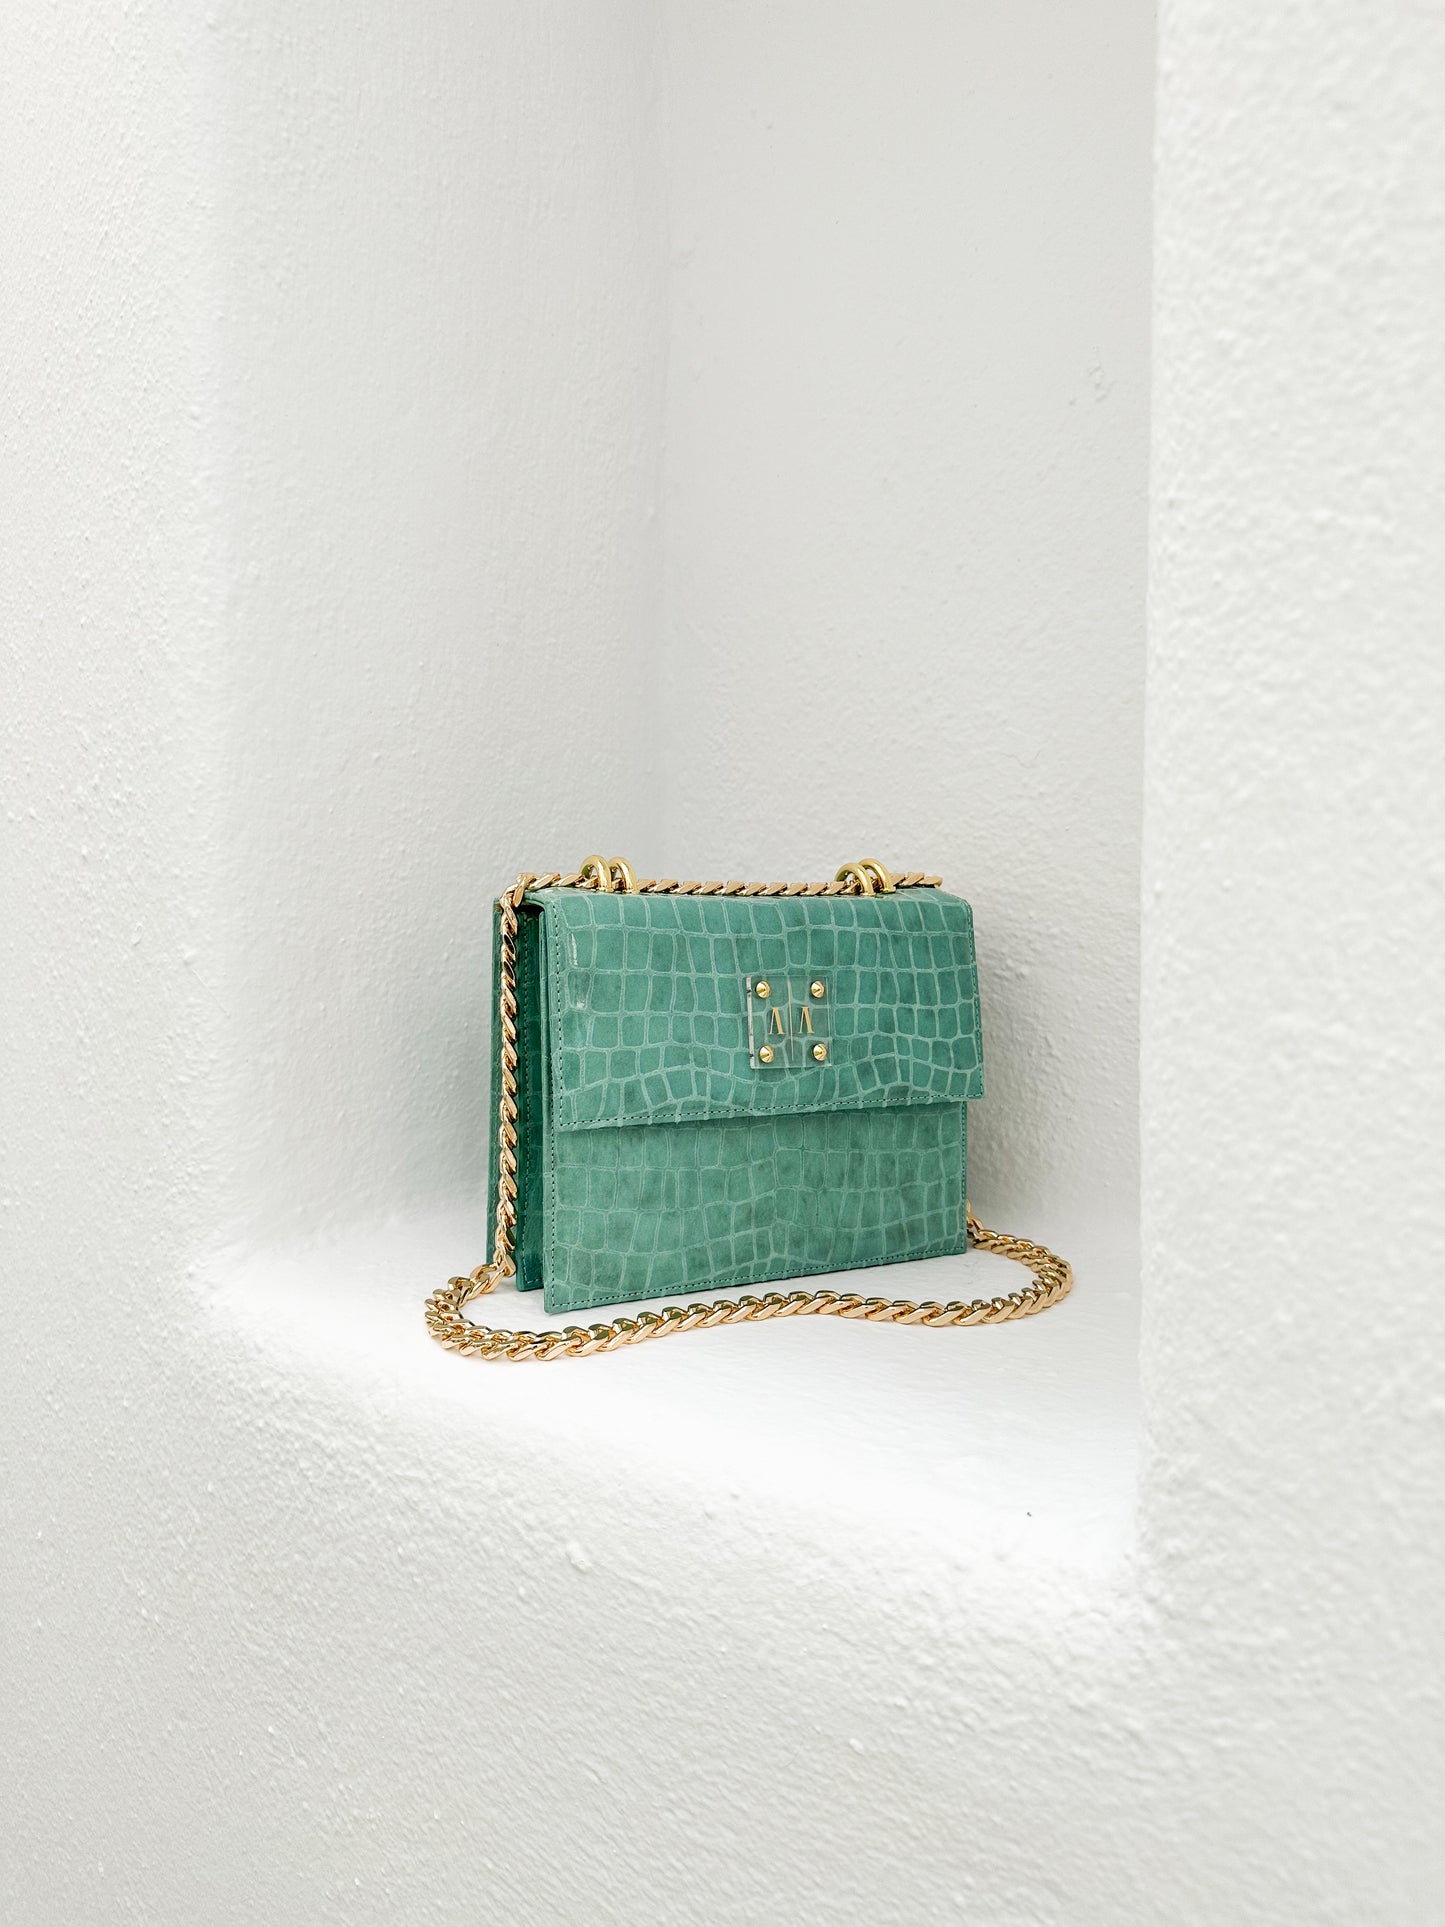 APRIL BAG  |  TURQUOISE GREEN EMBOSSED SUEDE